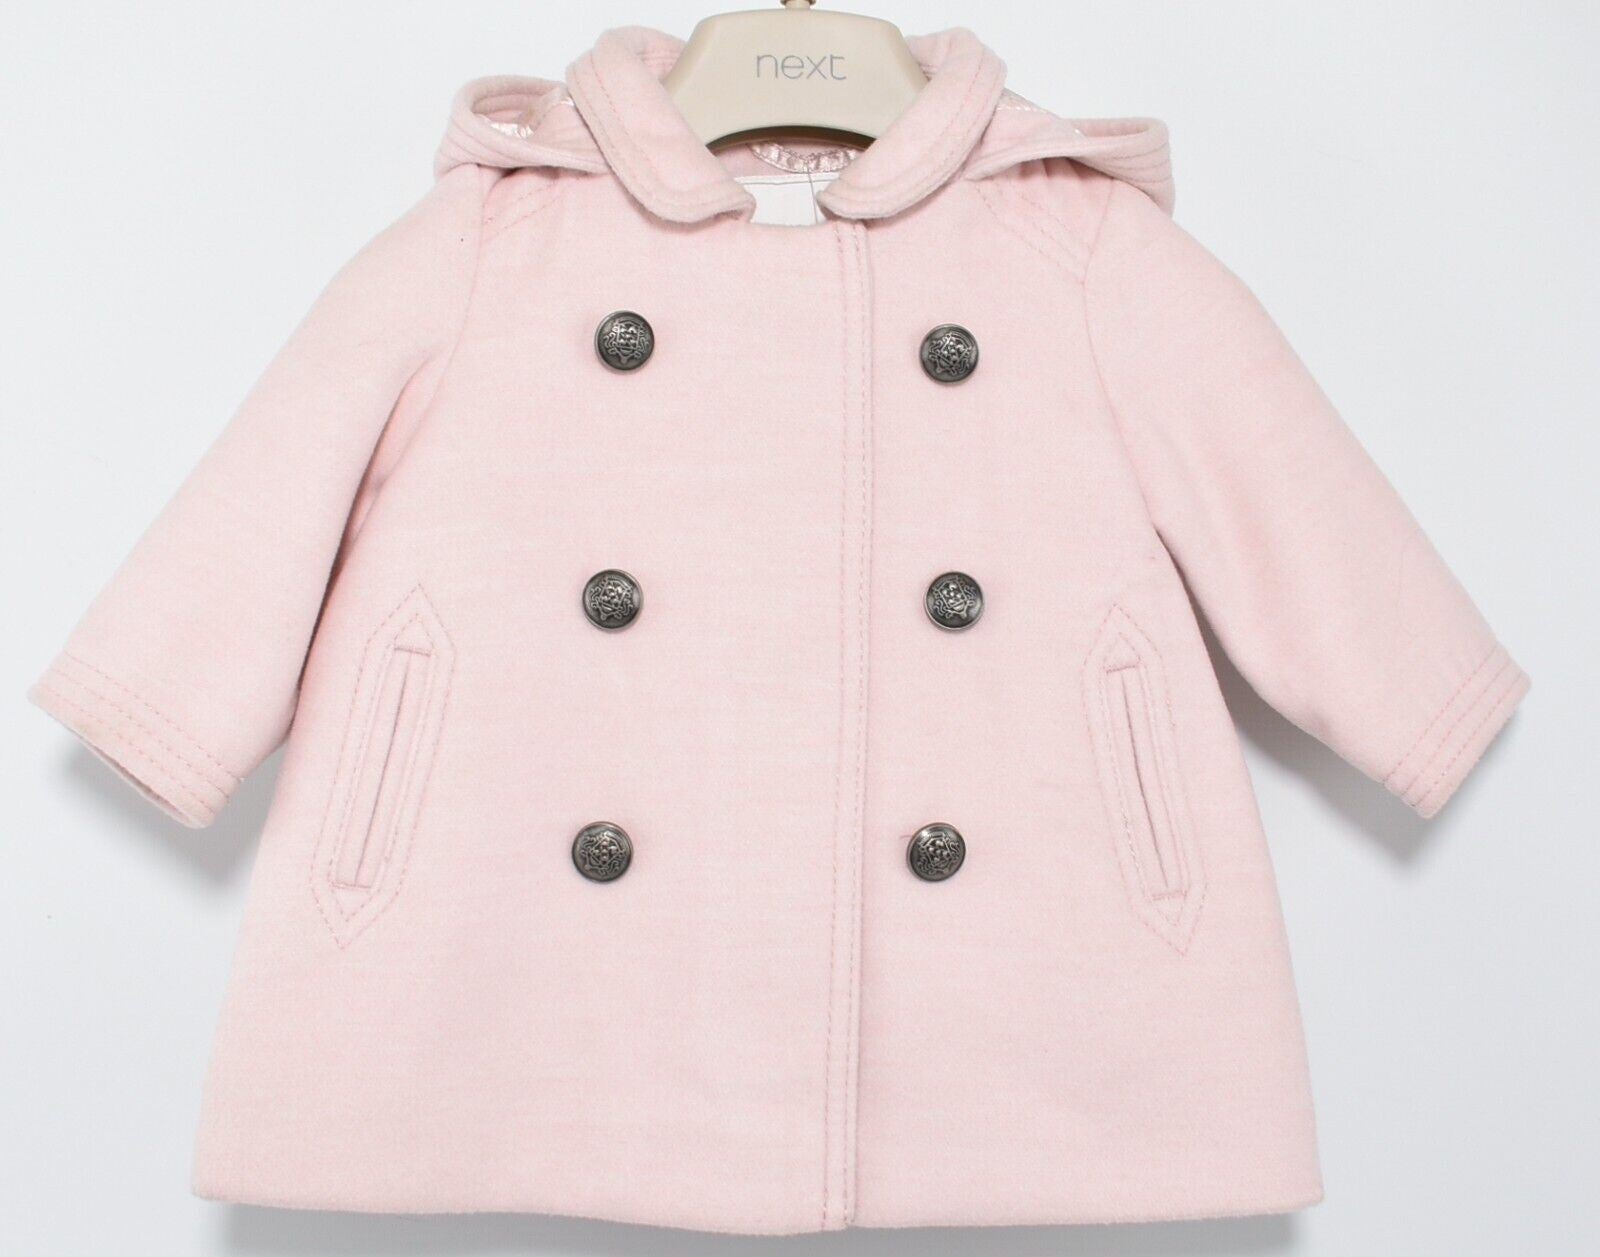 NEXT Baby Girls Hooded Coat, Light Pink, size 12-18 months